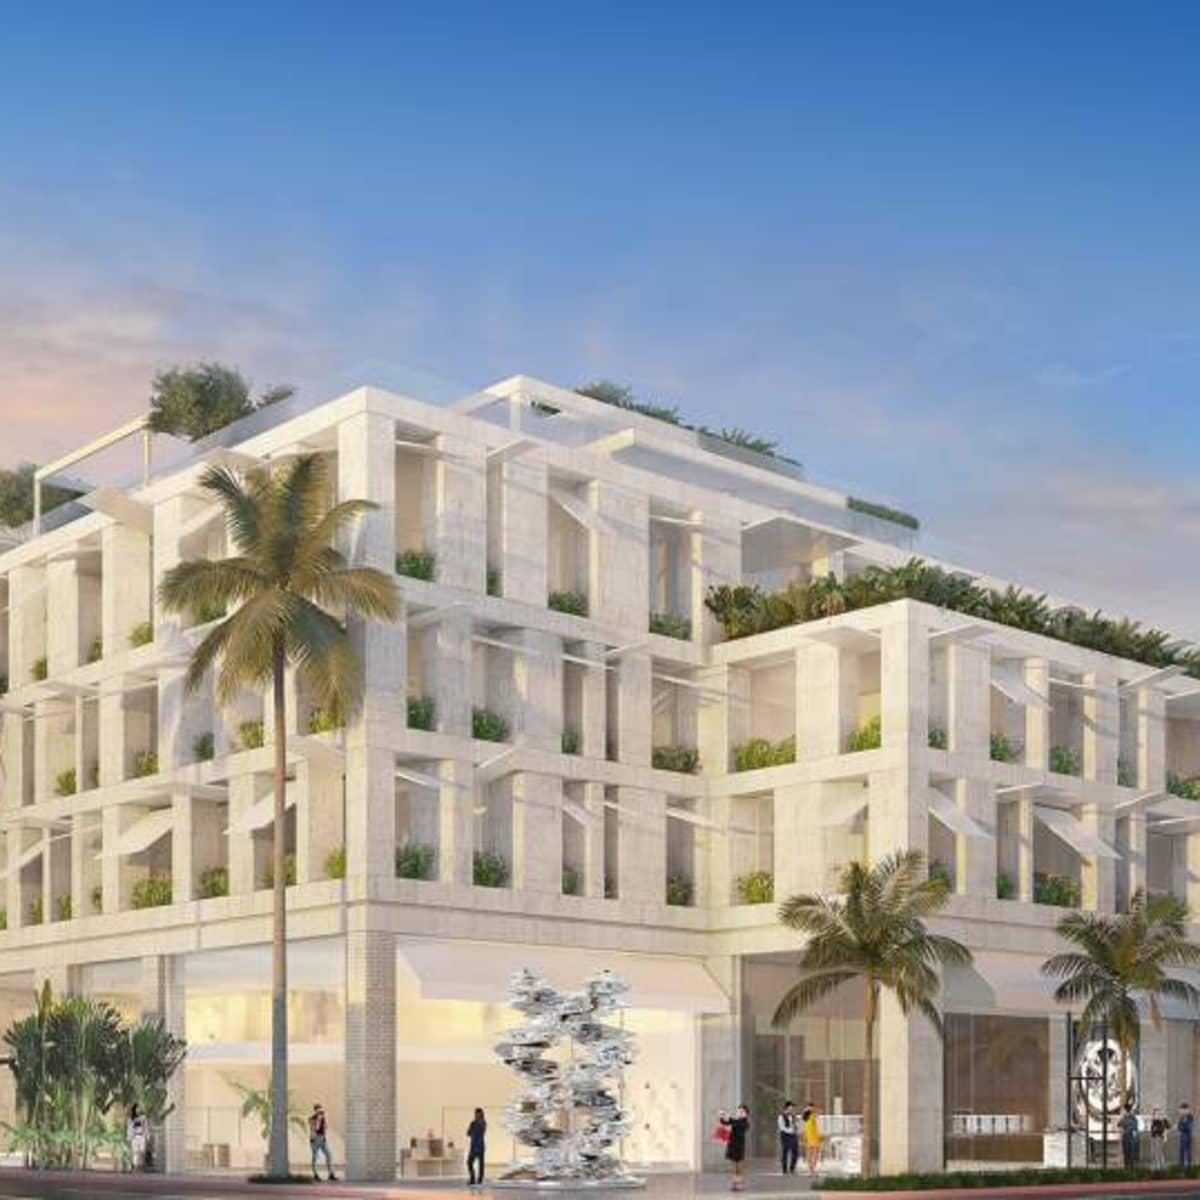 Beverly Hills Golden Triangle Will Get LVMH Treatment With Hotel